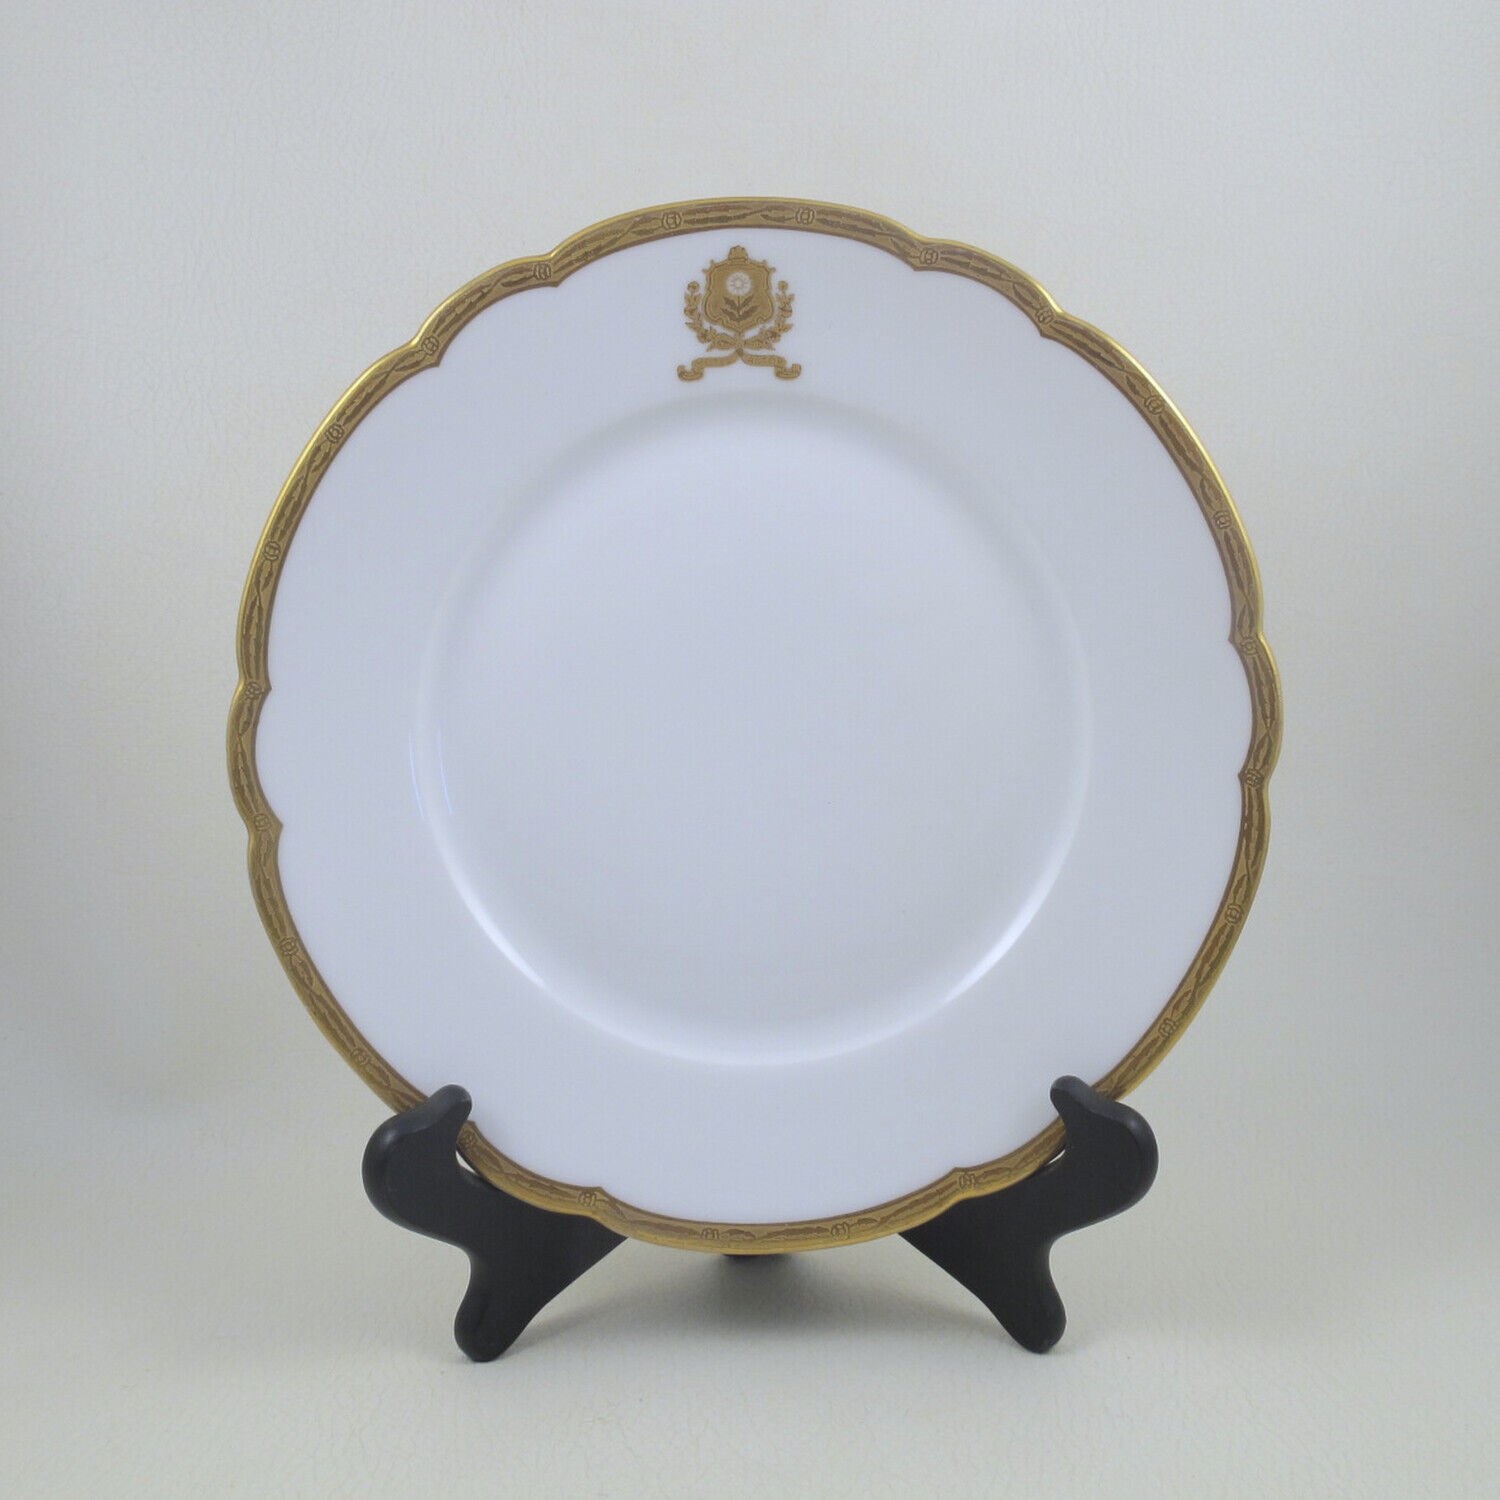 HOTEL ASTOR Dinner / Luncheon Plate(s) Theodore Haviland Limoges China L Straus